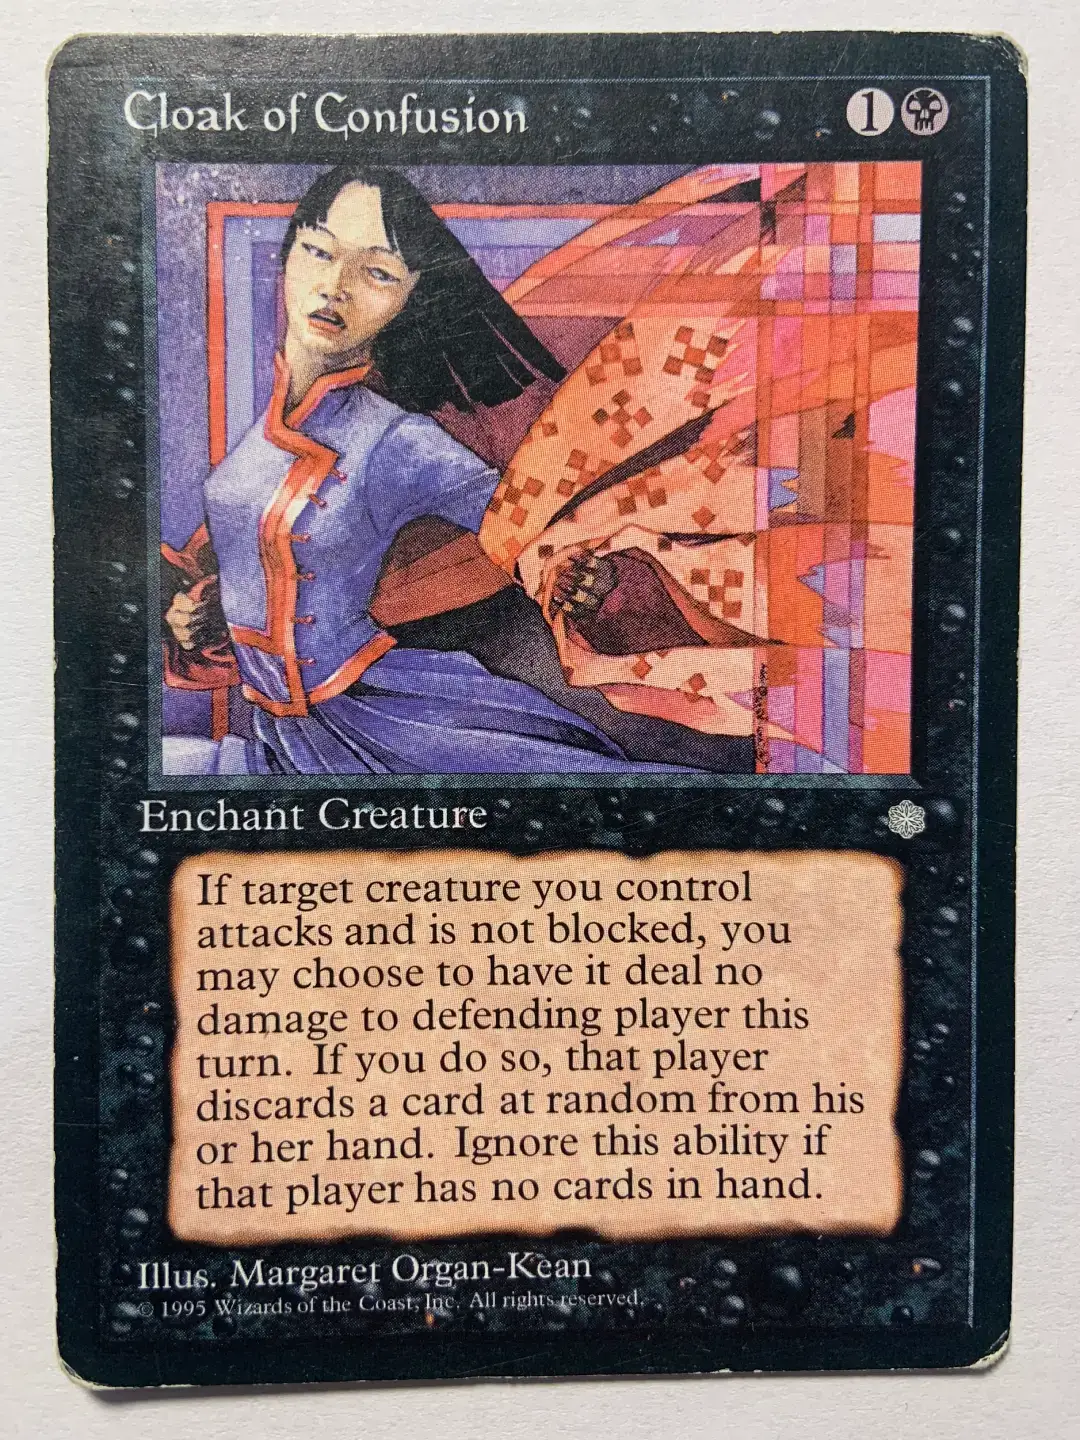 Example of a heavily played card